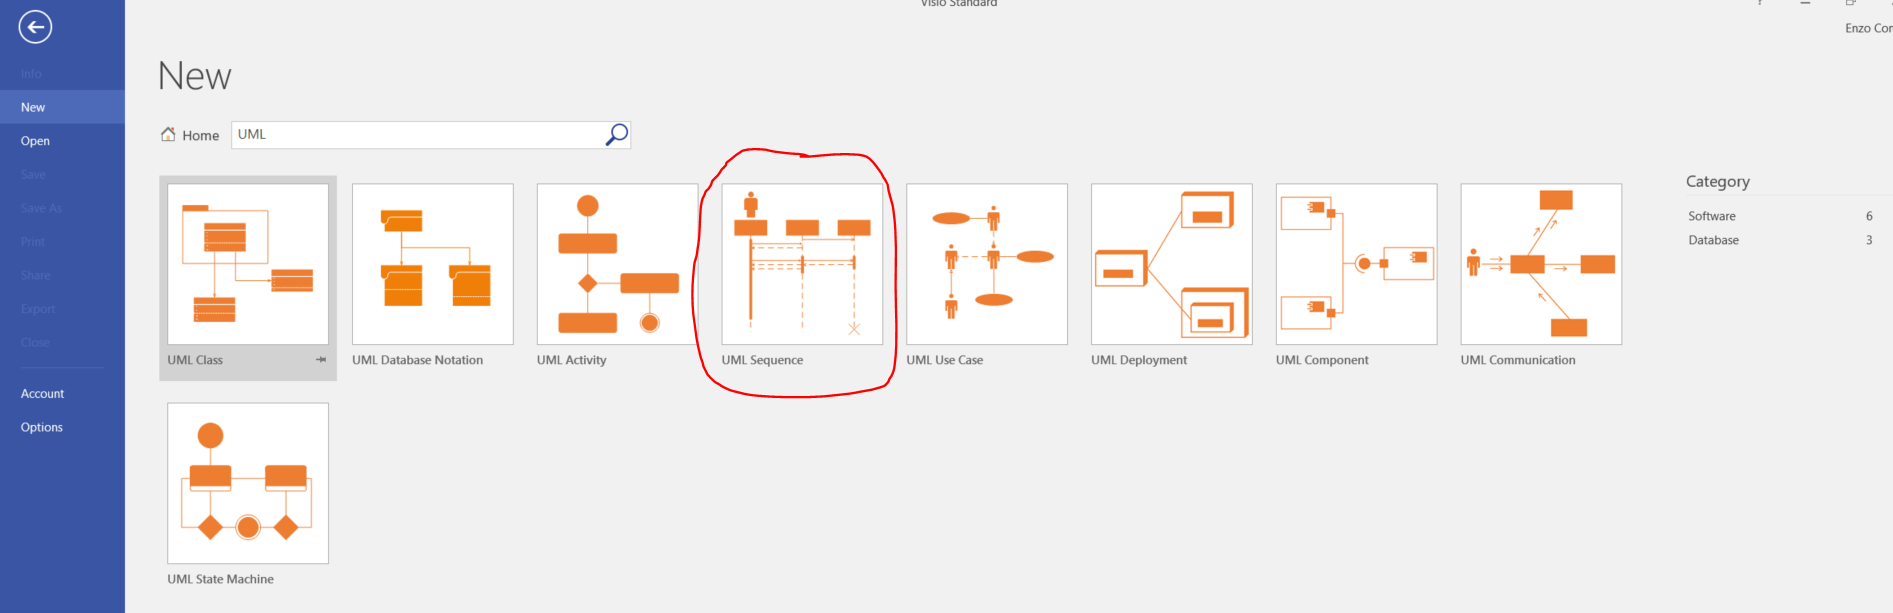 Drawing Uml 2.5 Diagrams With Visio 2016 (Even With The